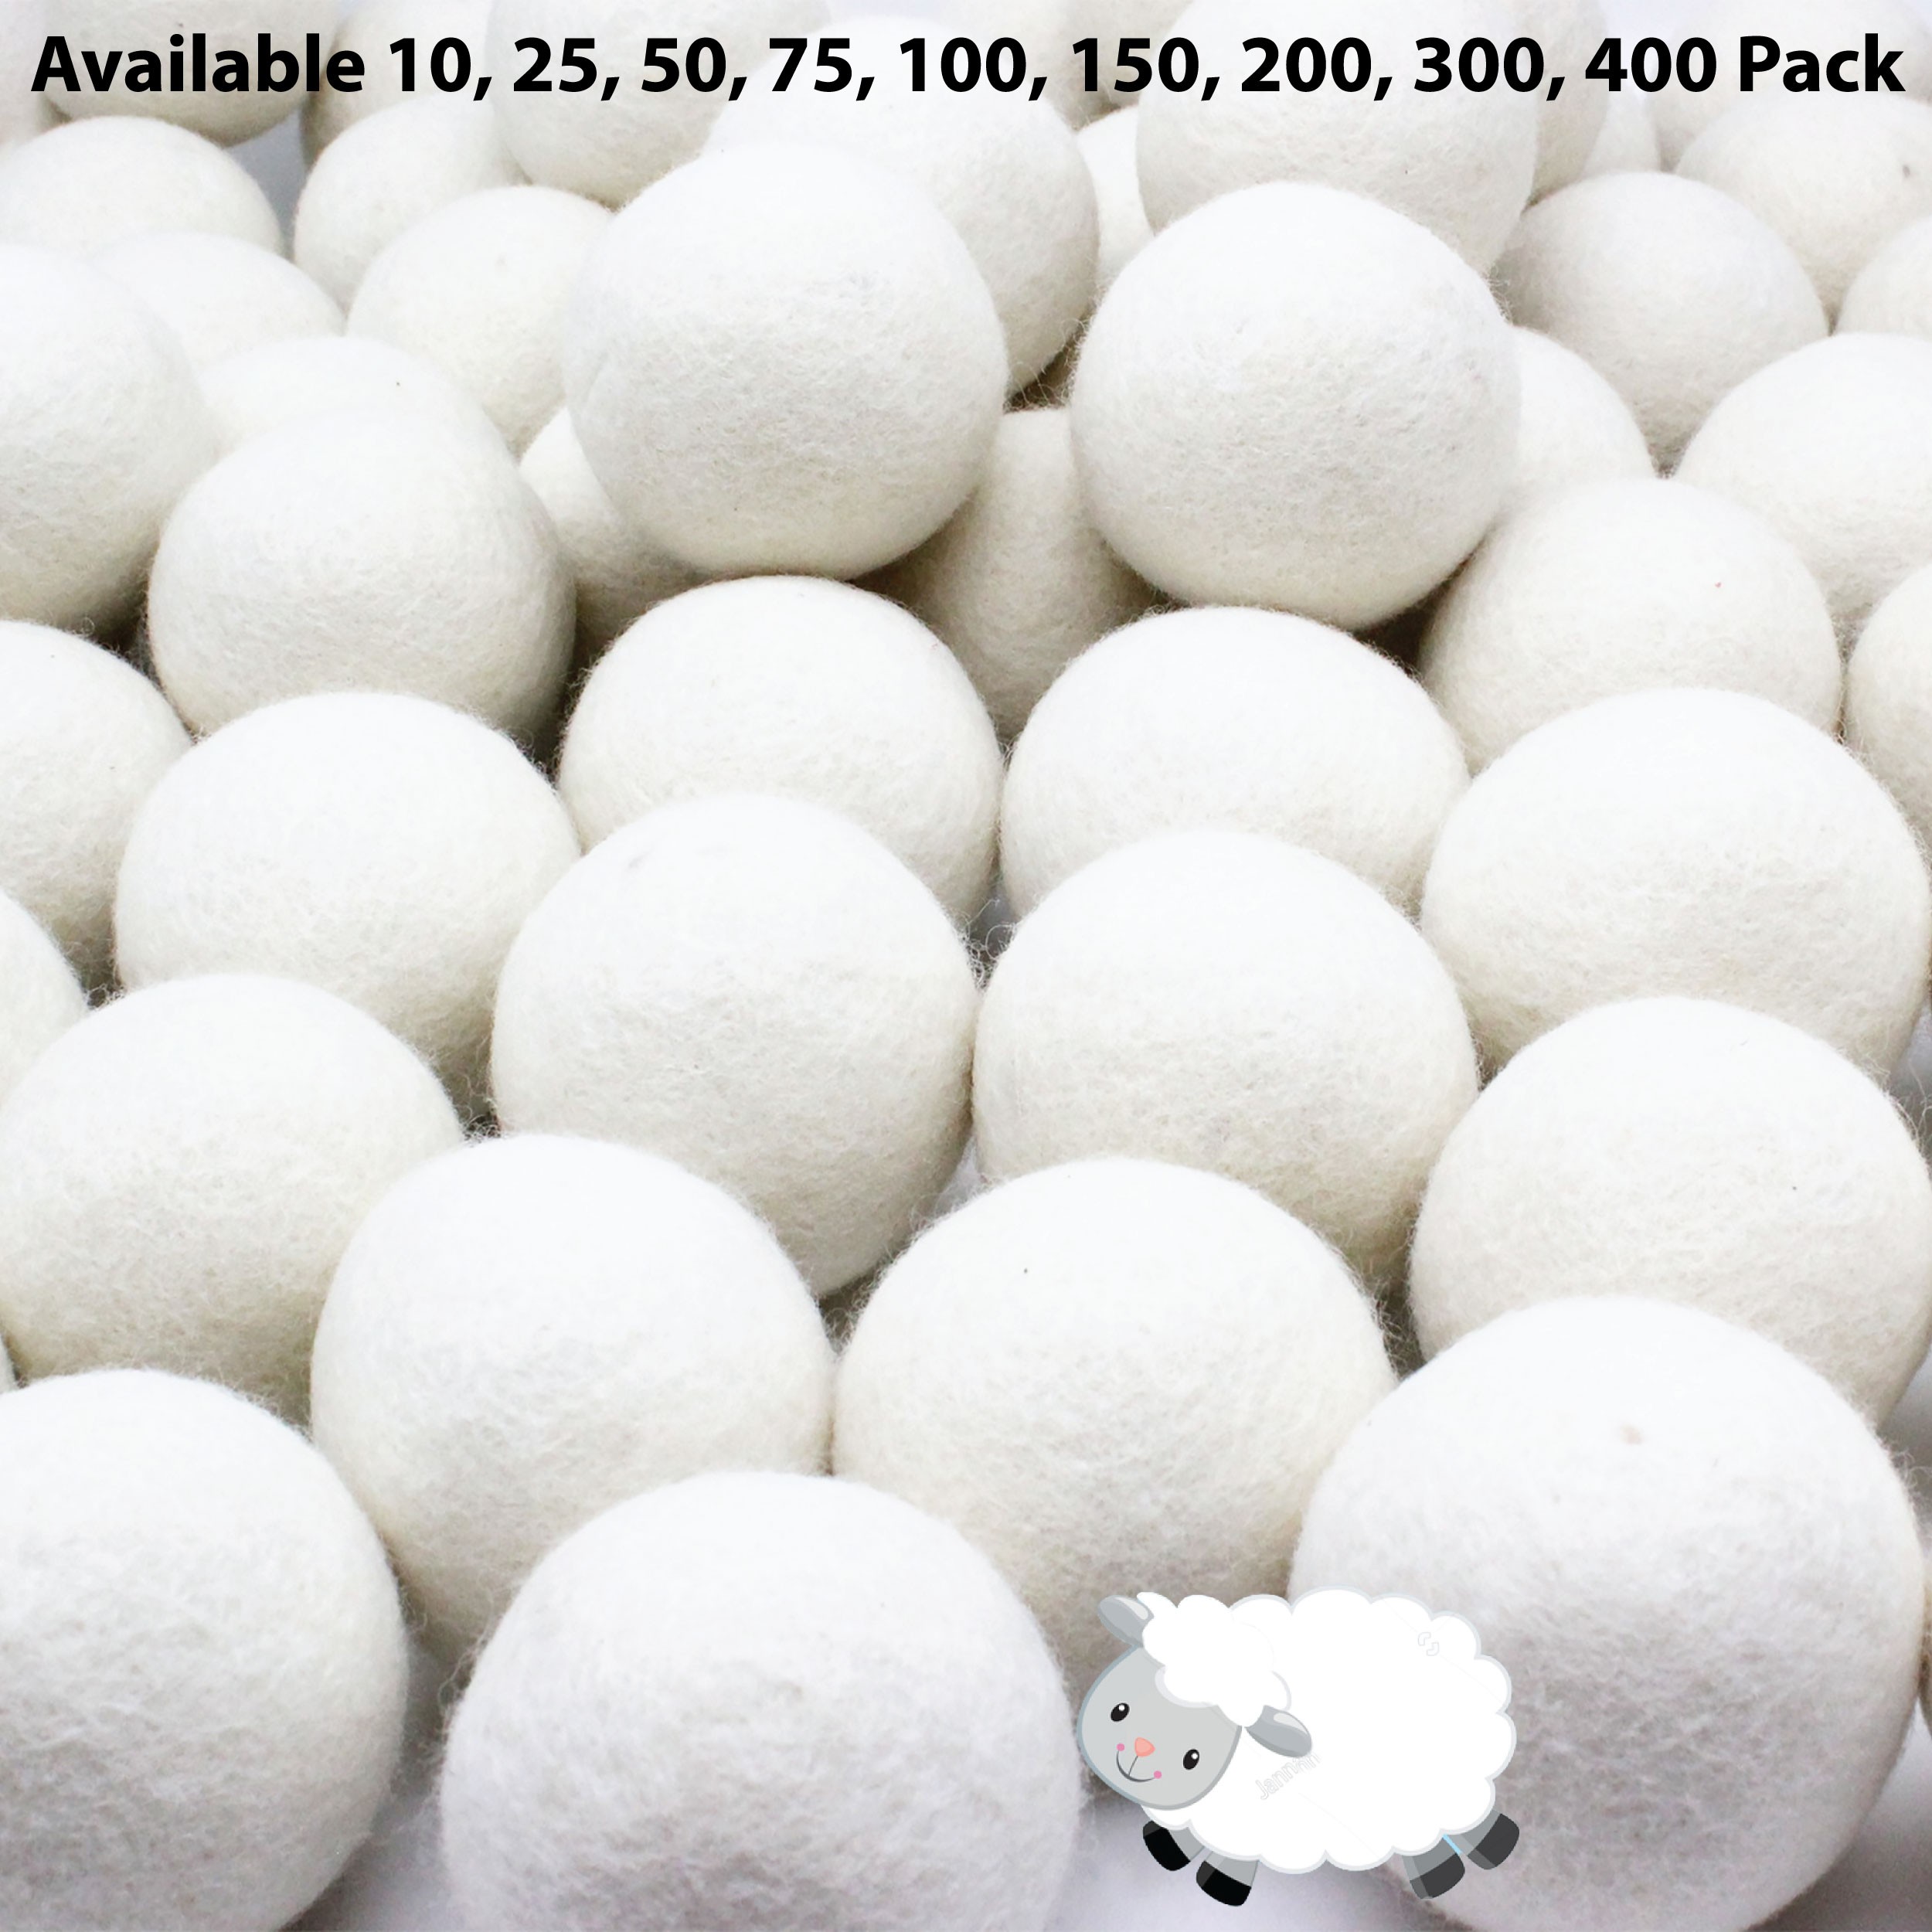 EcoJeannie Premium XL Wool Dryer Balls - Reusable & Organic Fabric Softener  for Delicate Skin and Baby Clothes - Made from 100% New Zealand Wool 